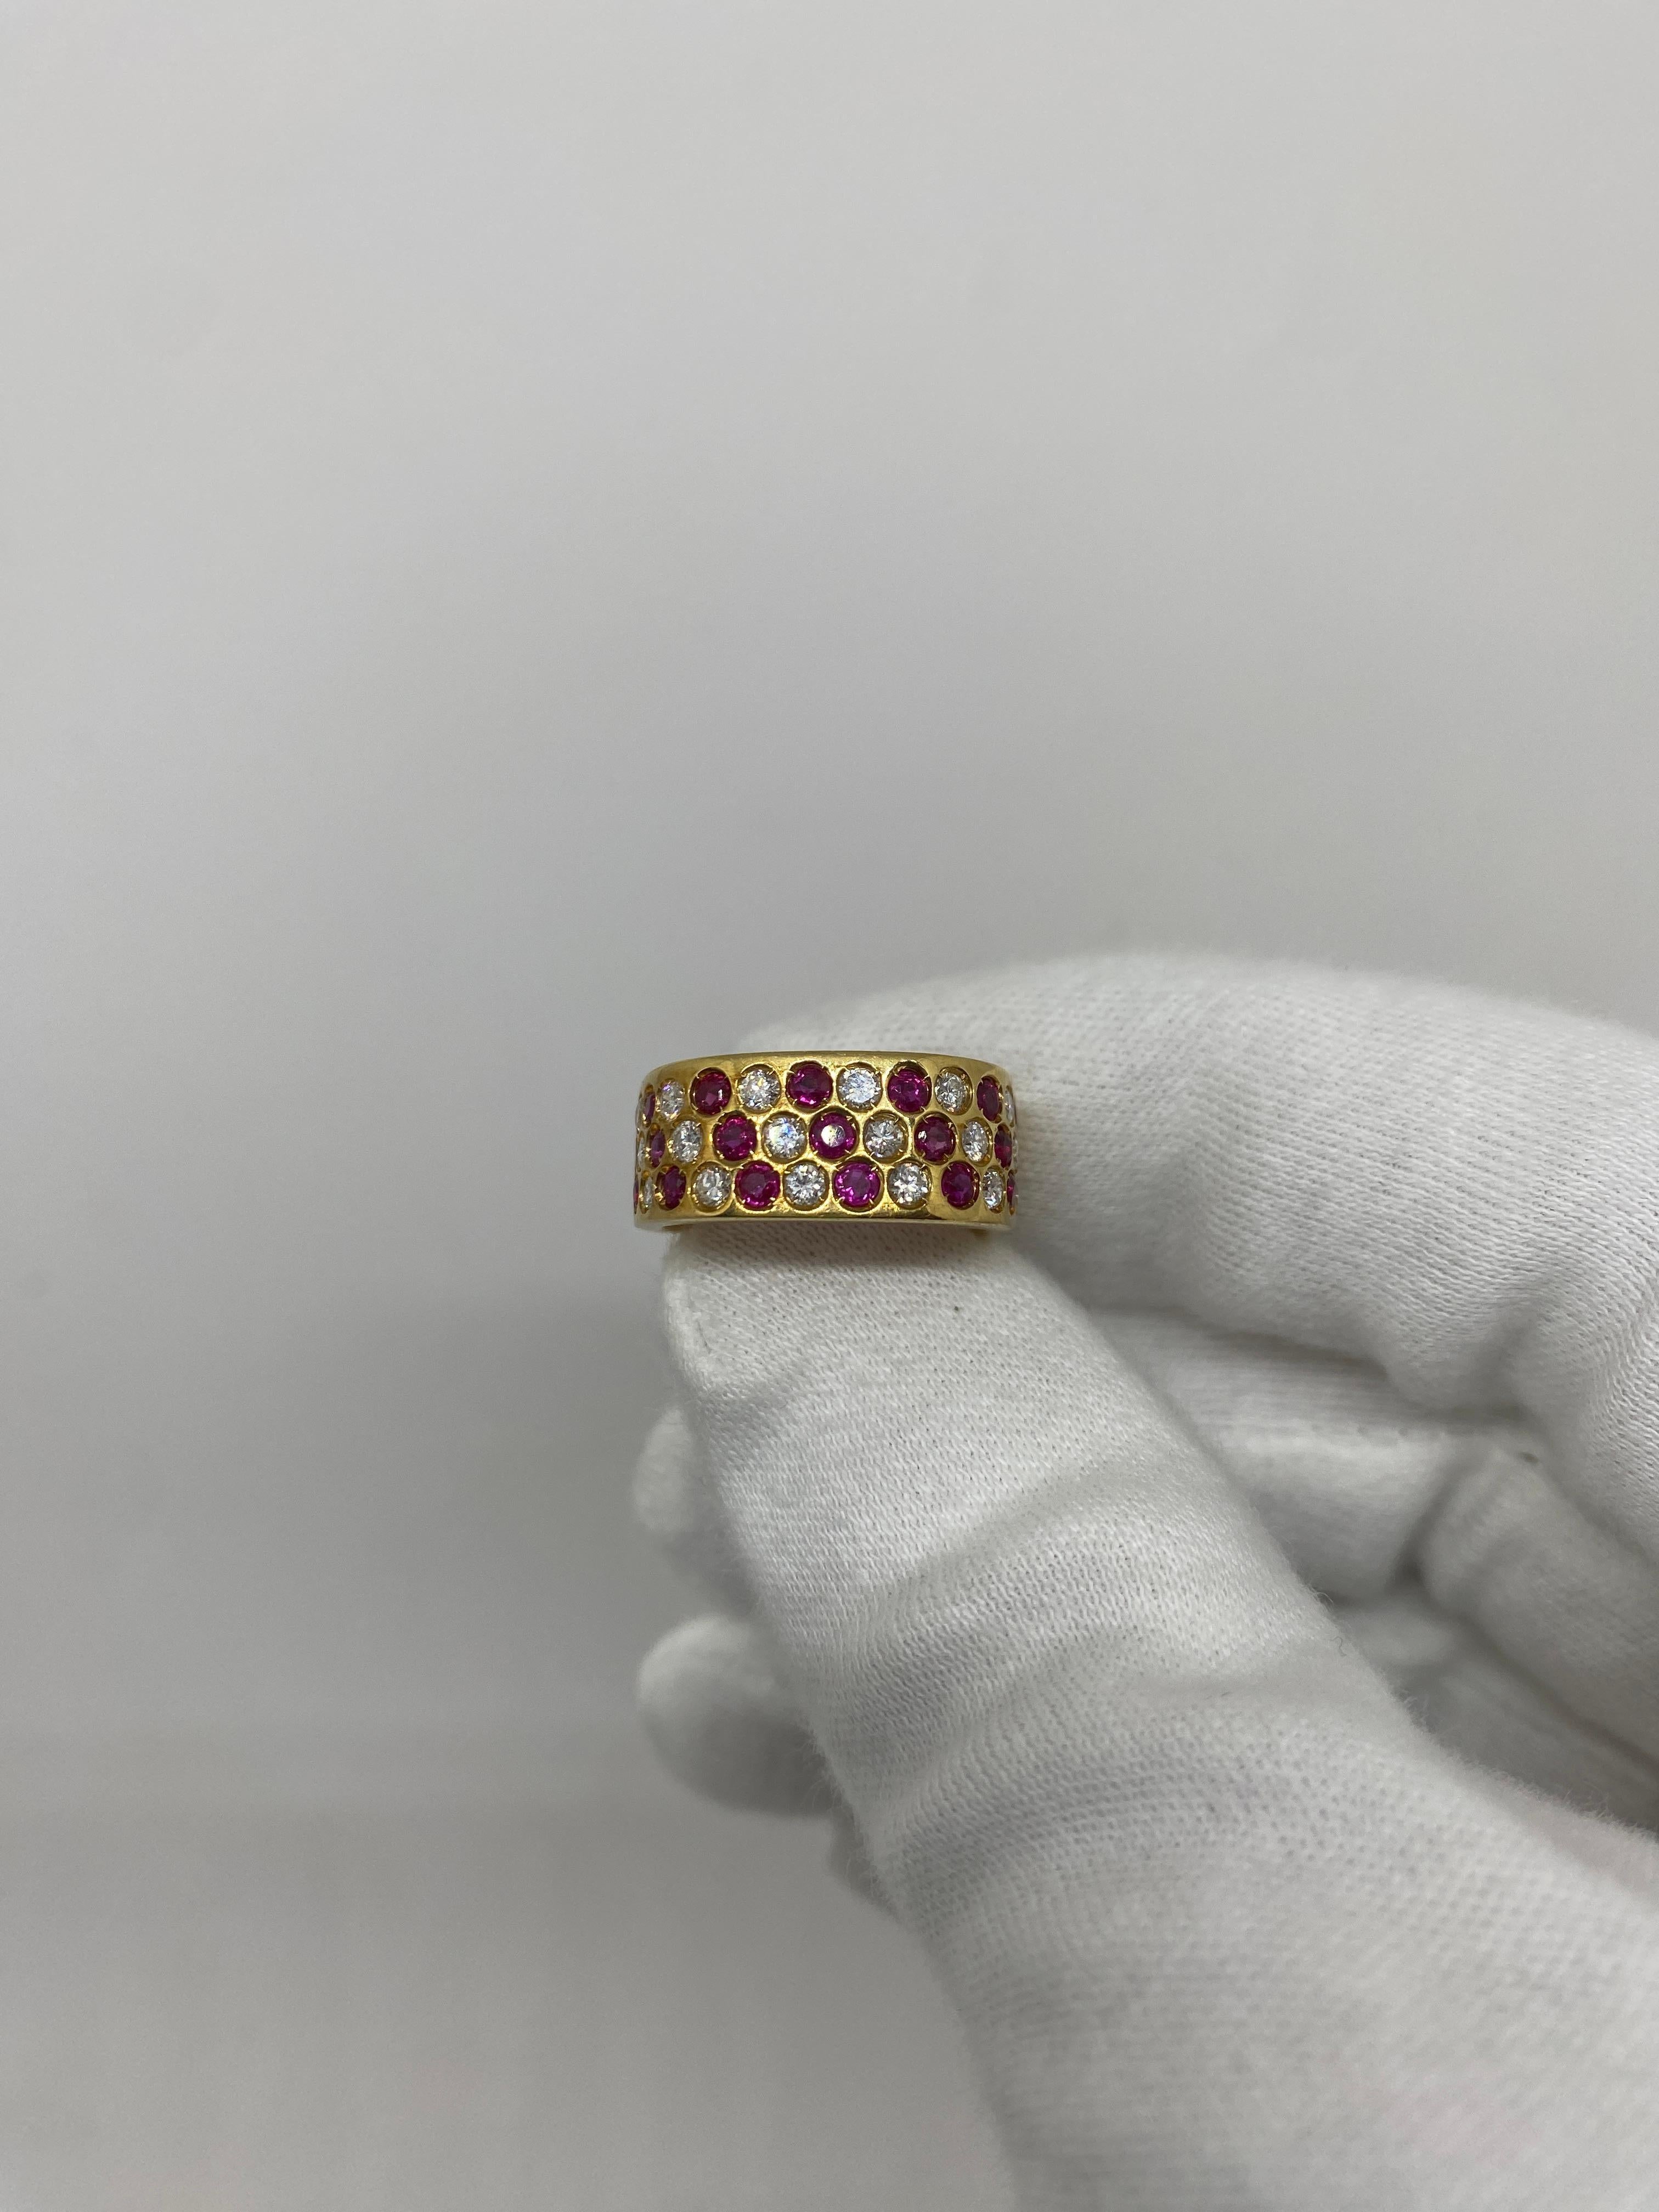 Ring made of 18kt yellow gold with natural brilliant-cut diamonds for ct.1.12 and brilliant-cut rubies for ct.1.22

Welcome to our jewelry collection, where every piece tells a story of timeless elegance and unparalleled craftsmanship. As a